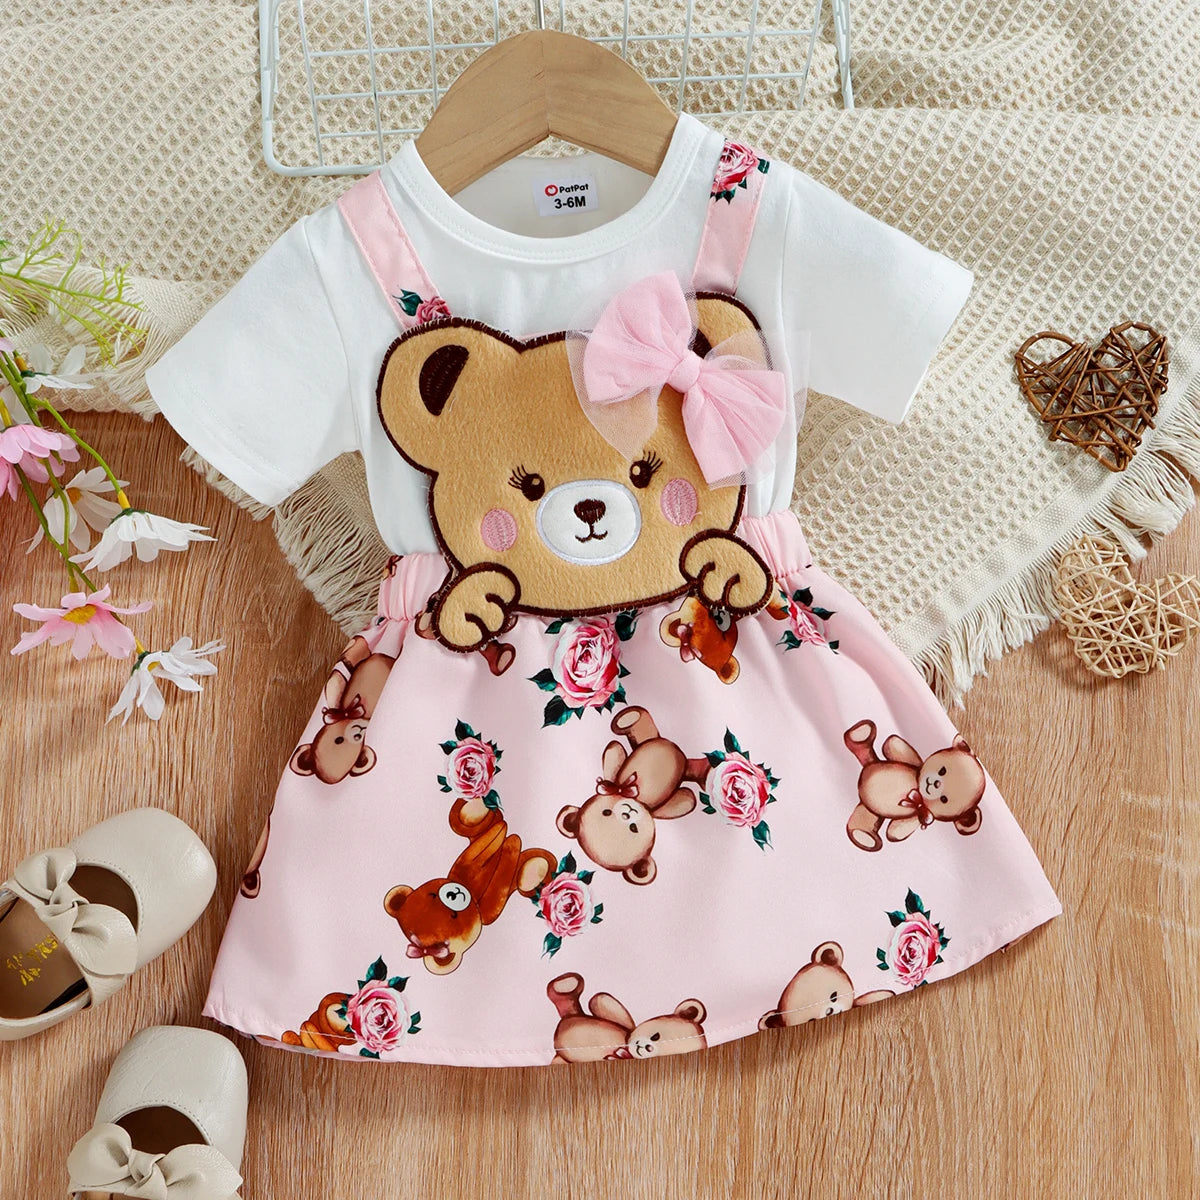 Summer Dresses for Baby Girls | Sweet Cartoon Bear Prints - For all baby